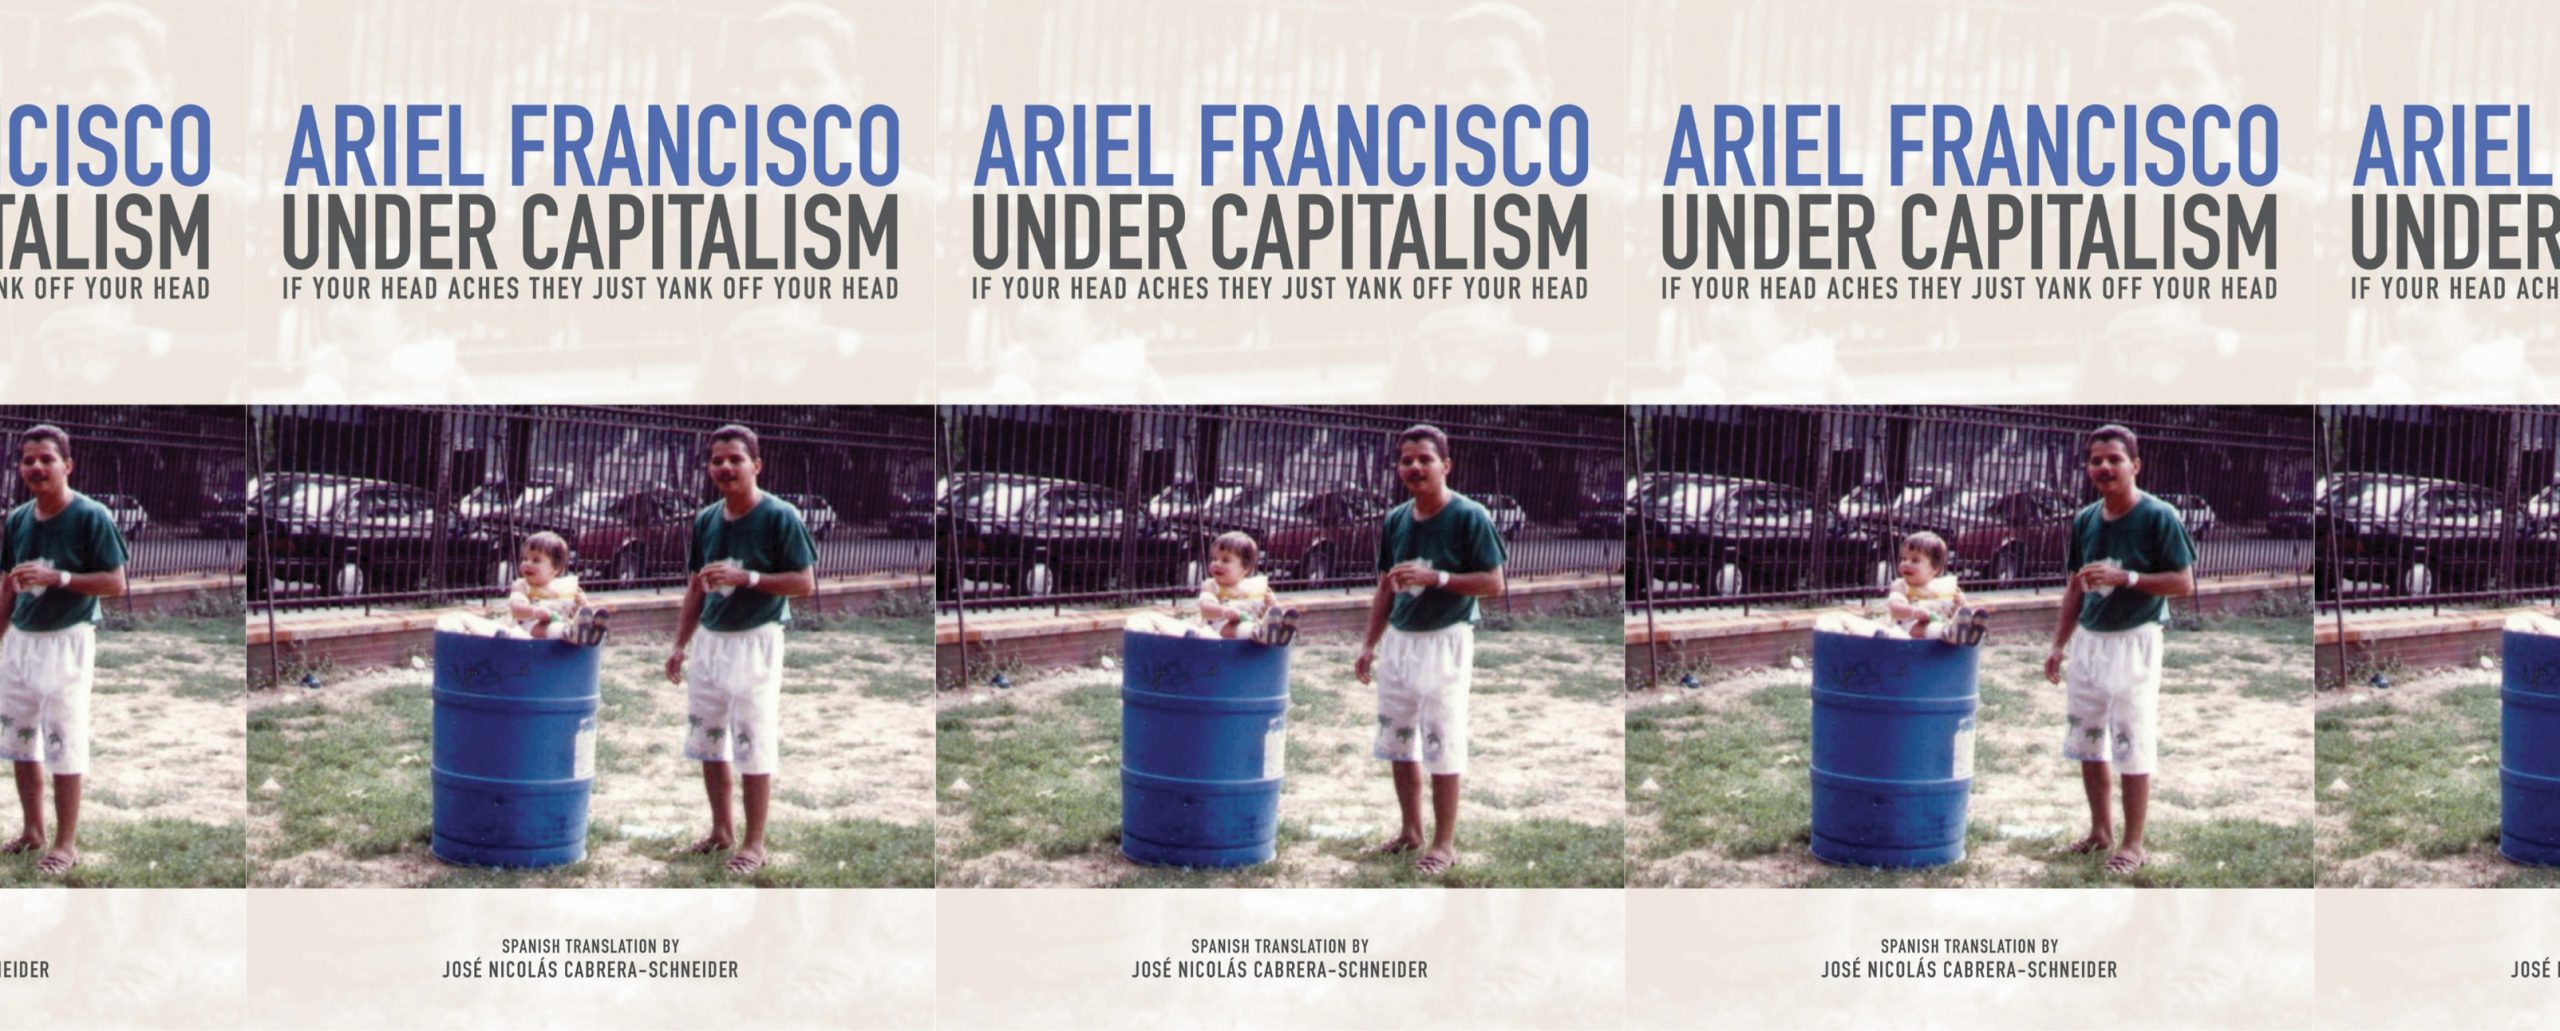 the book cover for Under Capitalism If Your Head Aches They Just Yank Off Your Head featuring a baby with his father in a park